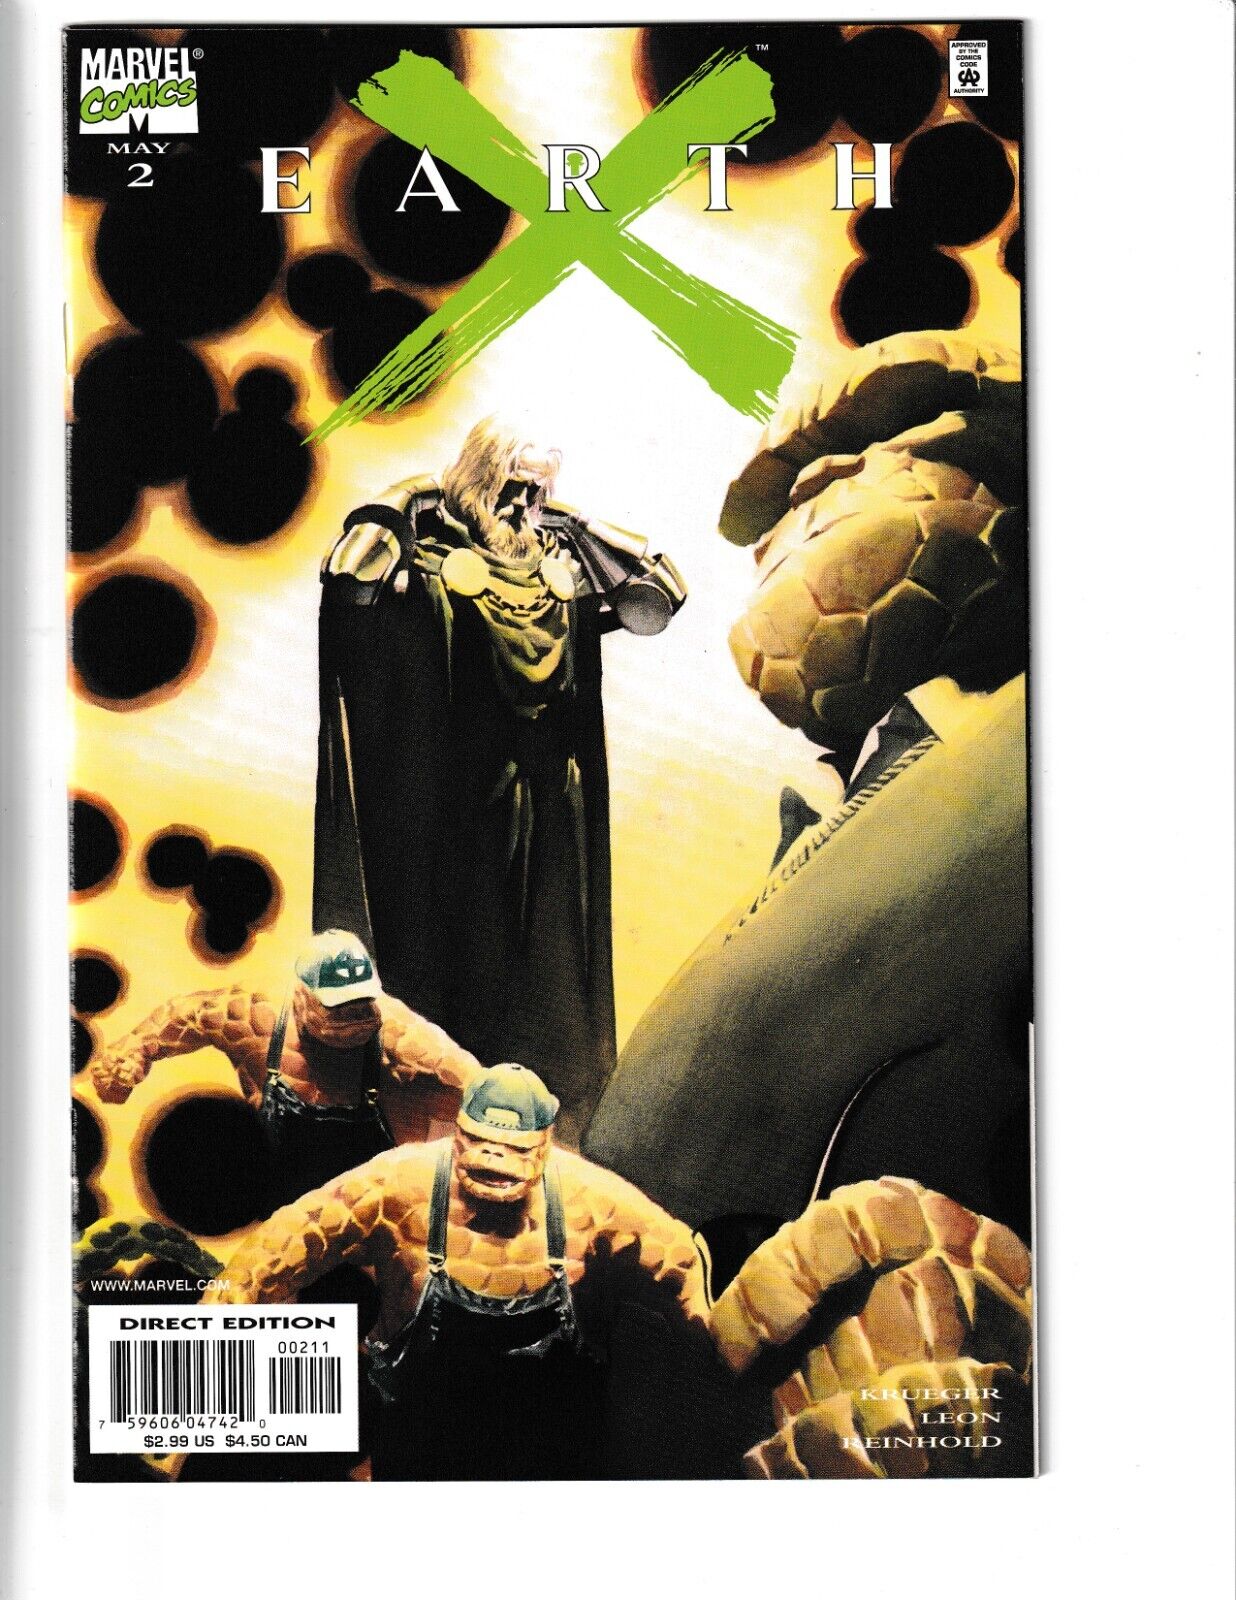 Earth X (Marvel, 1999) 1-12 - Pick Your Book Comp. Your Set